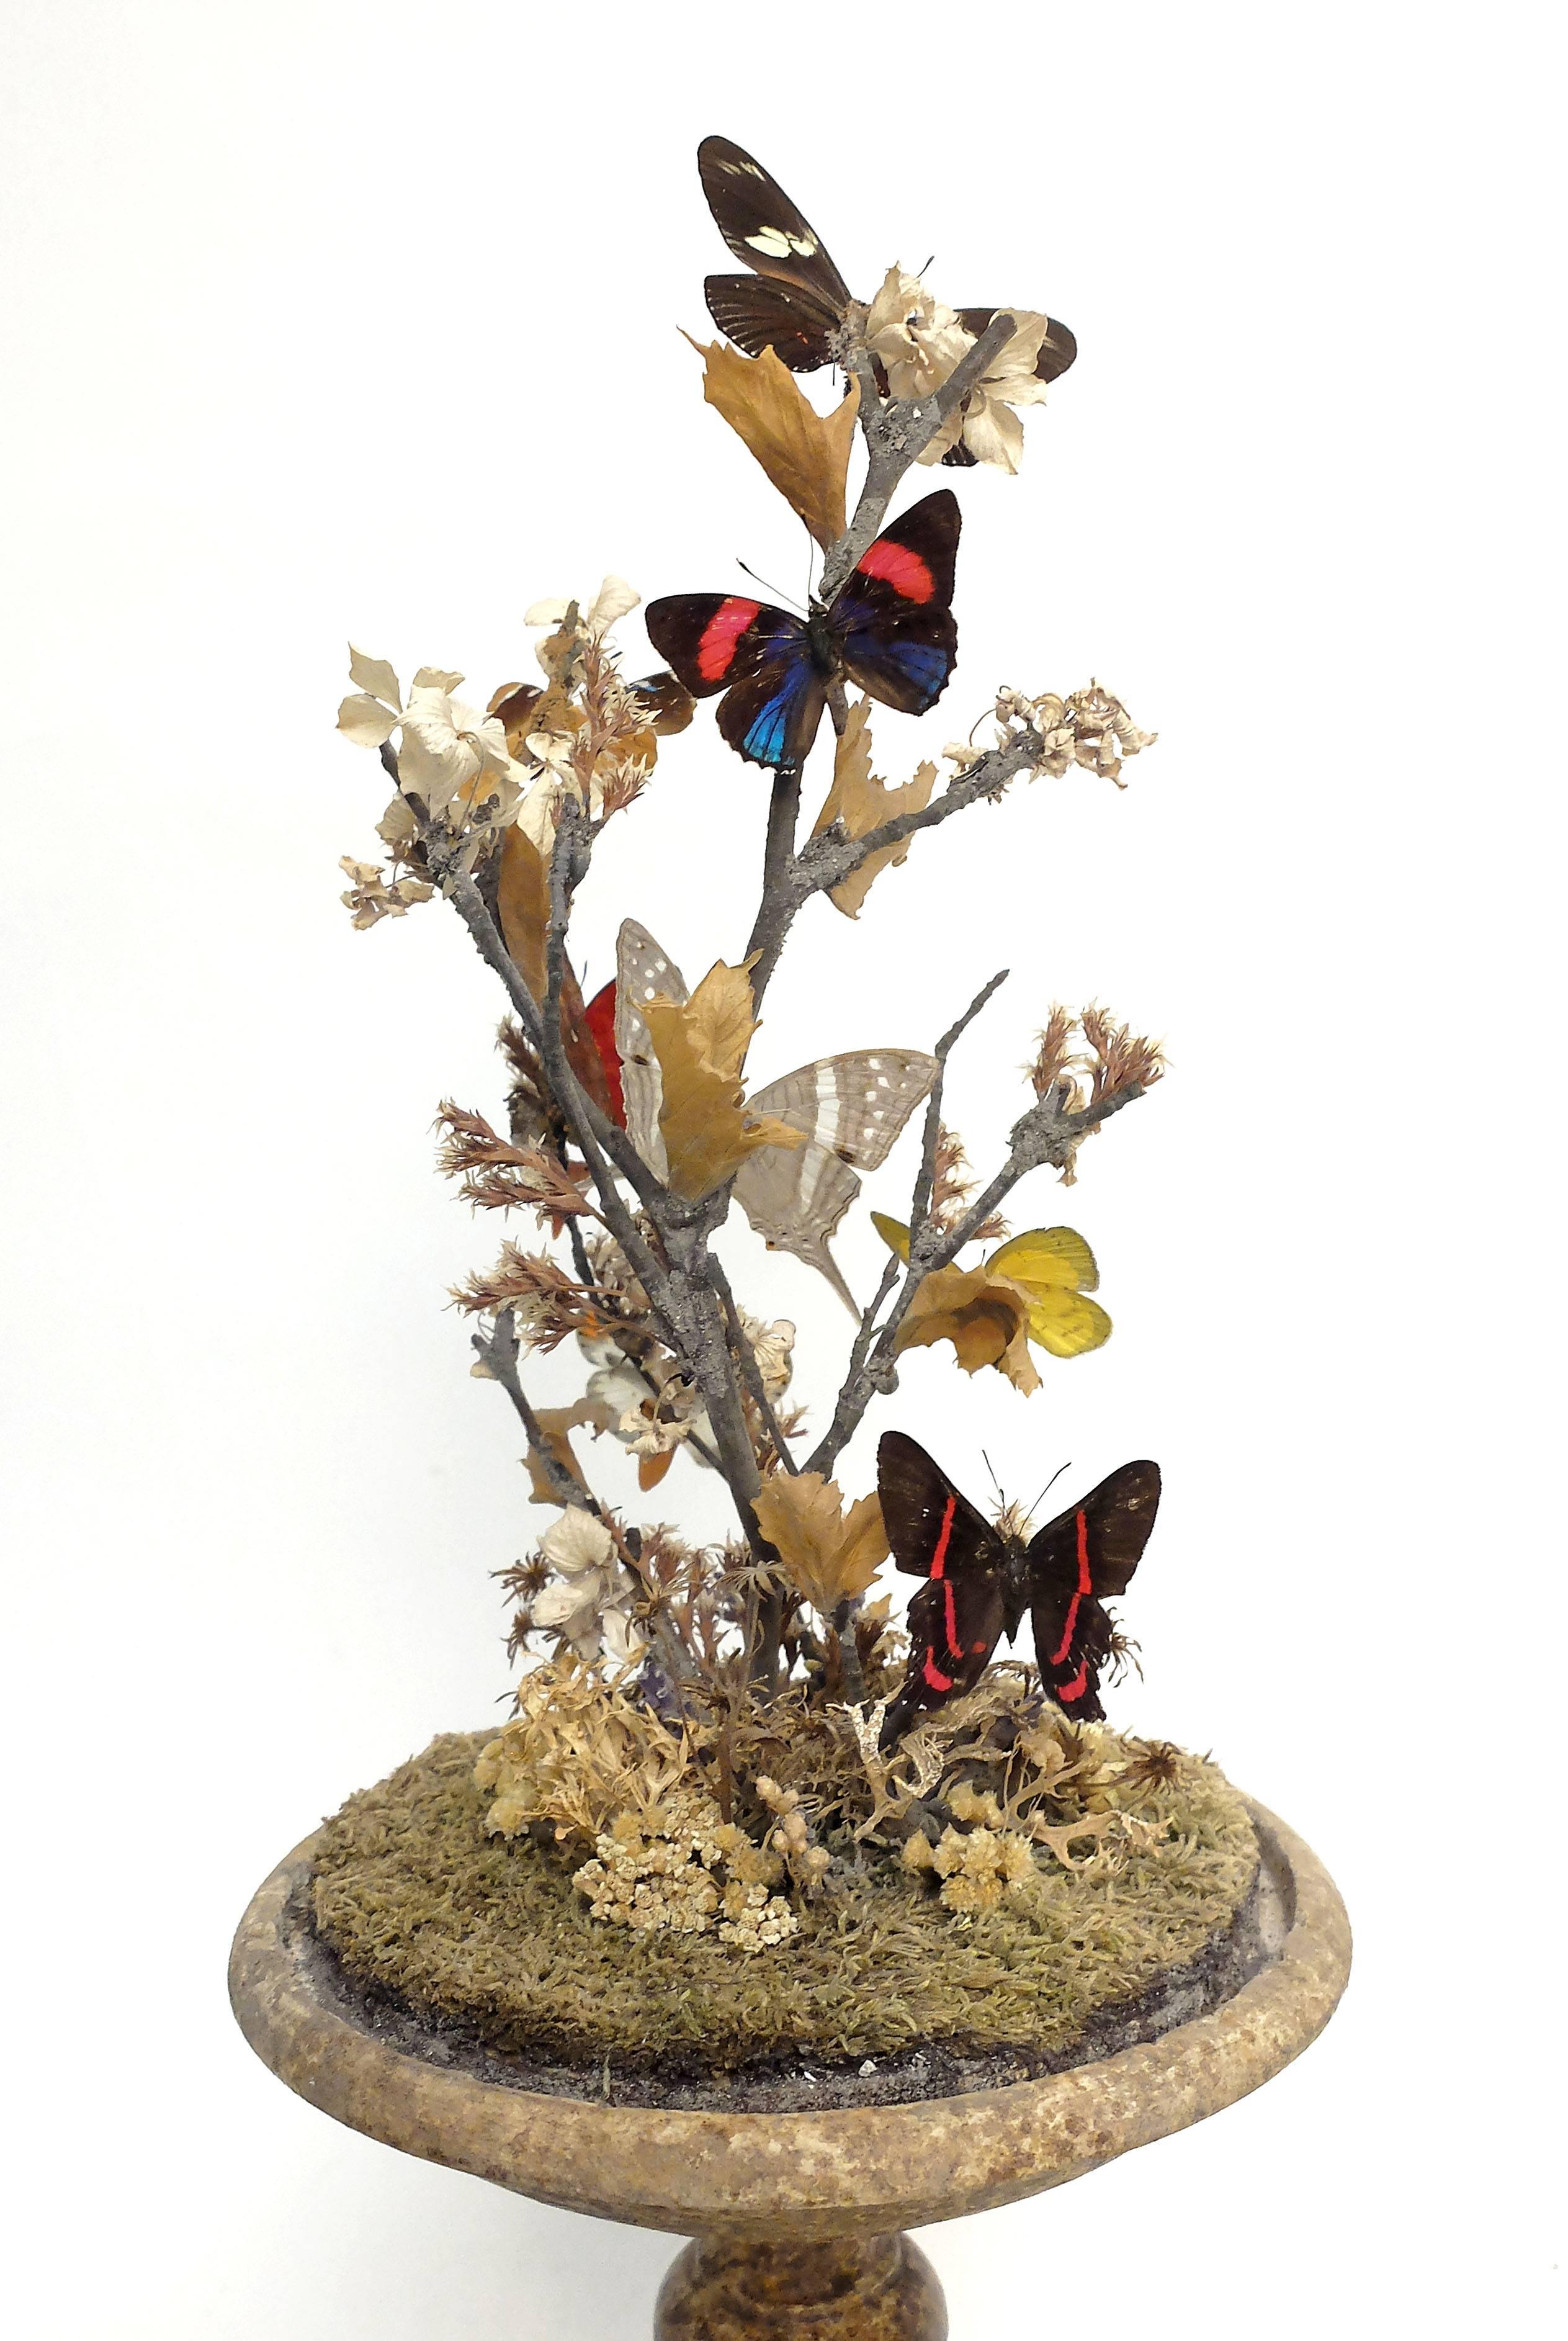 A Diorama with natural Wunderkammer specimens of eight butterflies leaned over a tree branches willing over moss the Specimens are mounted inside an oval glass dome over a brown gray painted wooden base.